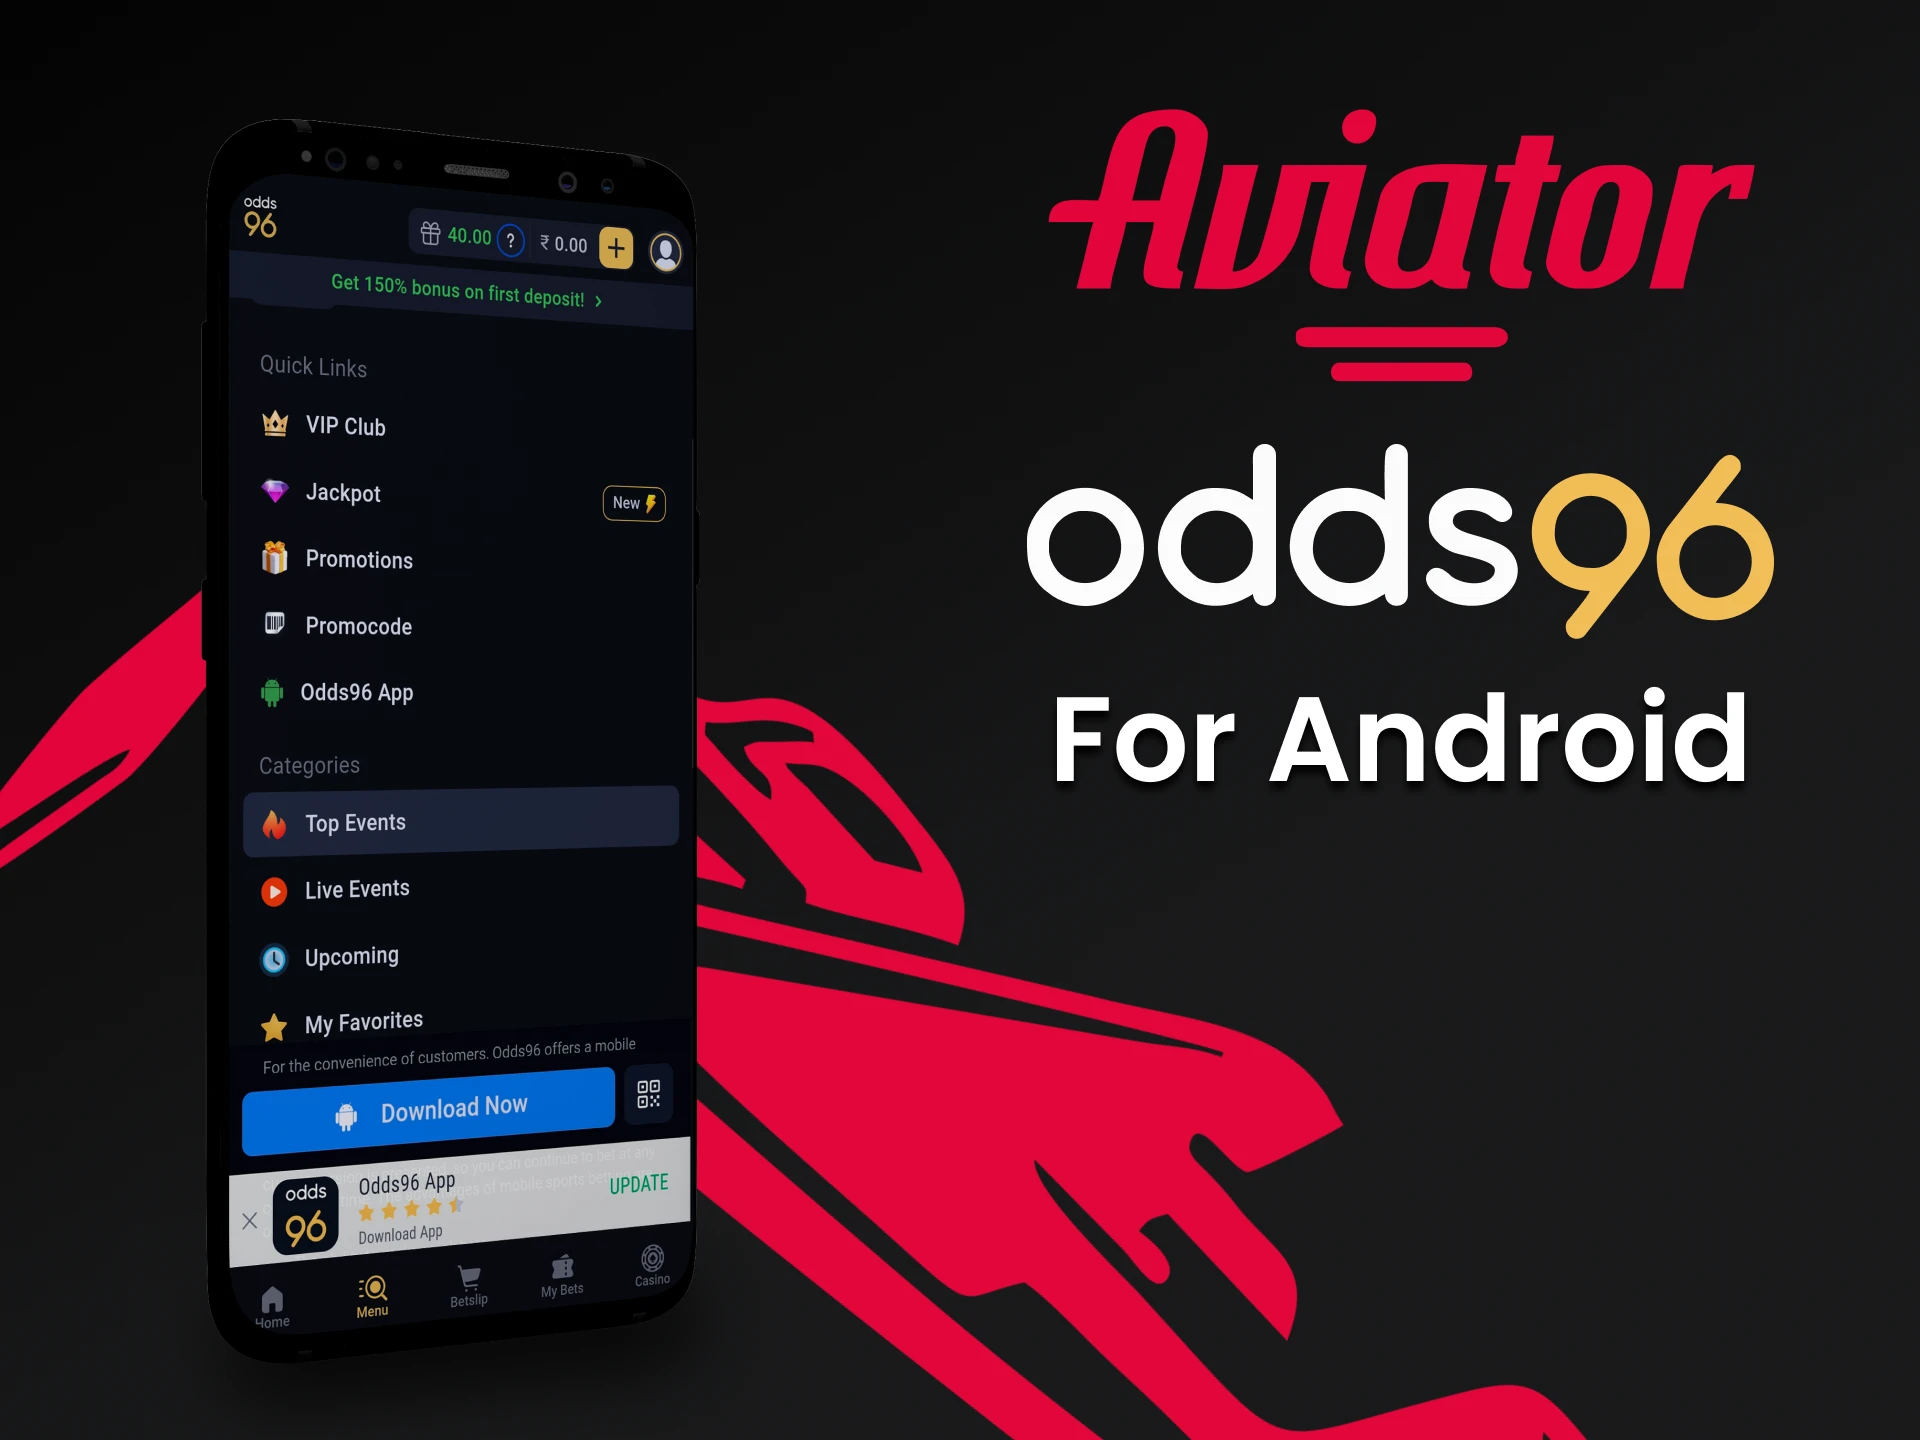 Download the Odds96 app on your Android device to play Aviator.